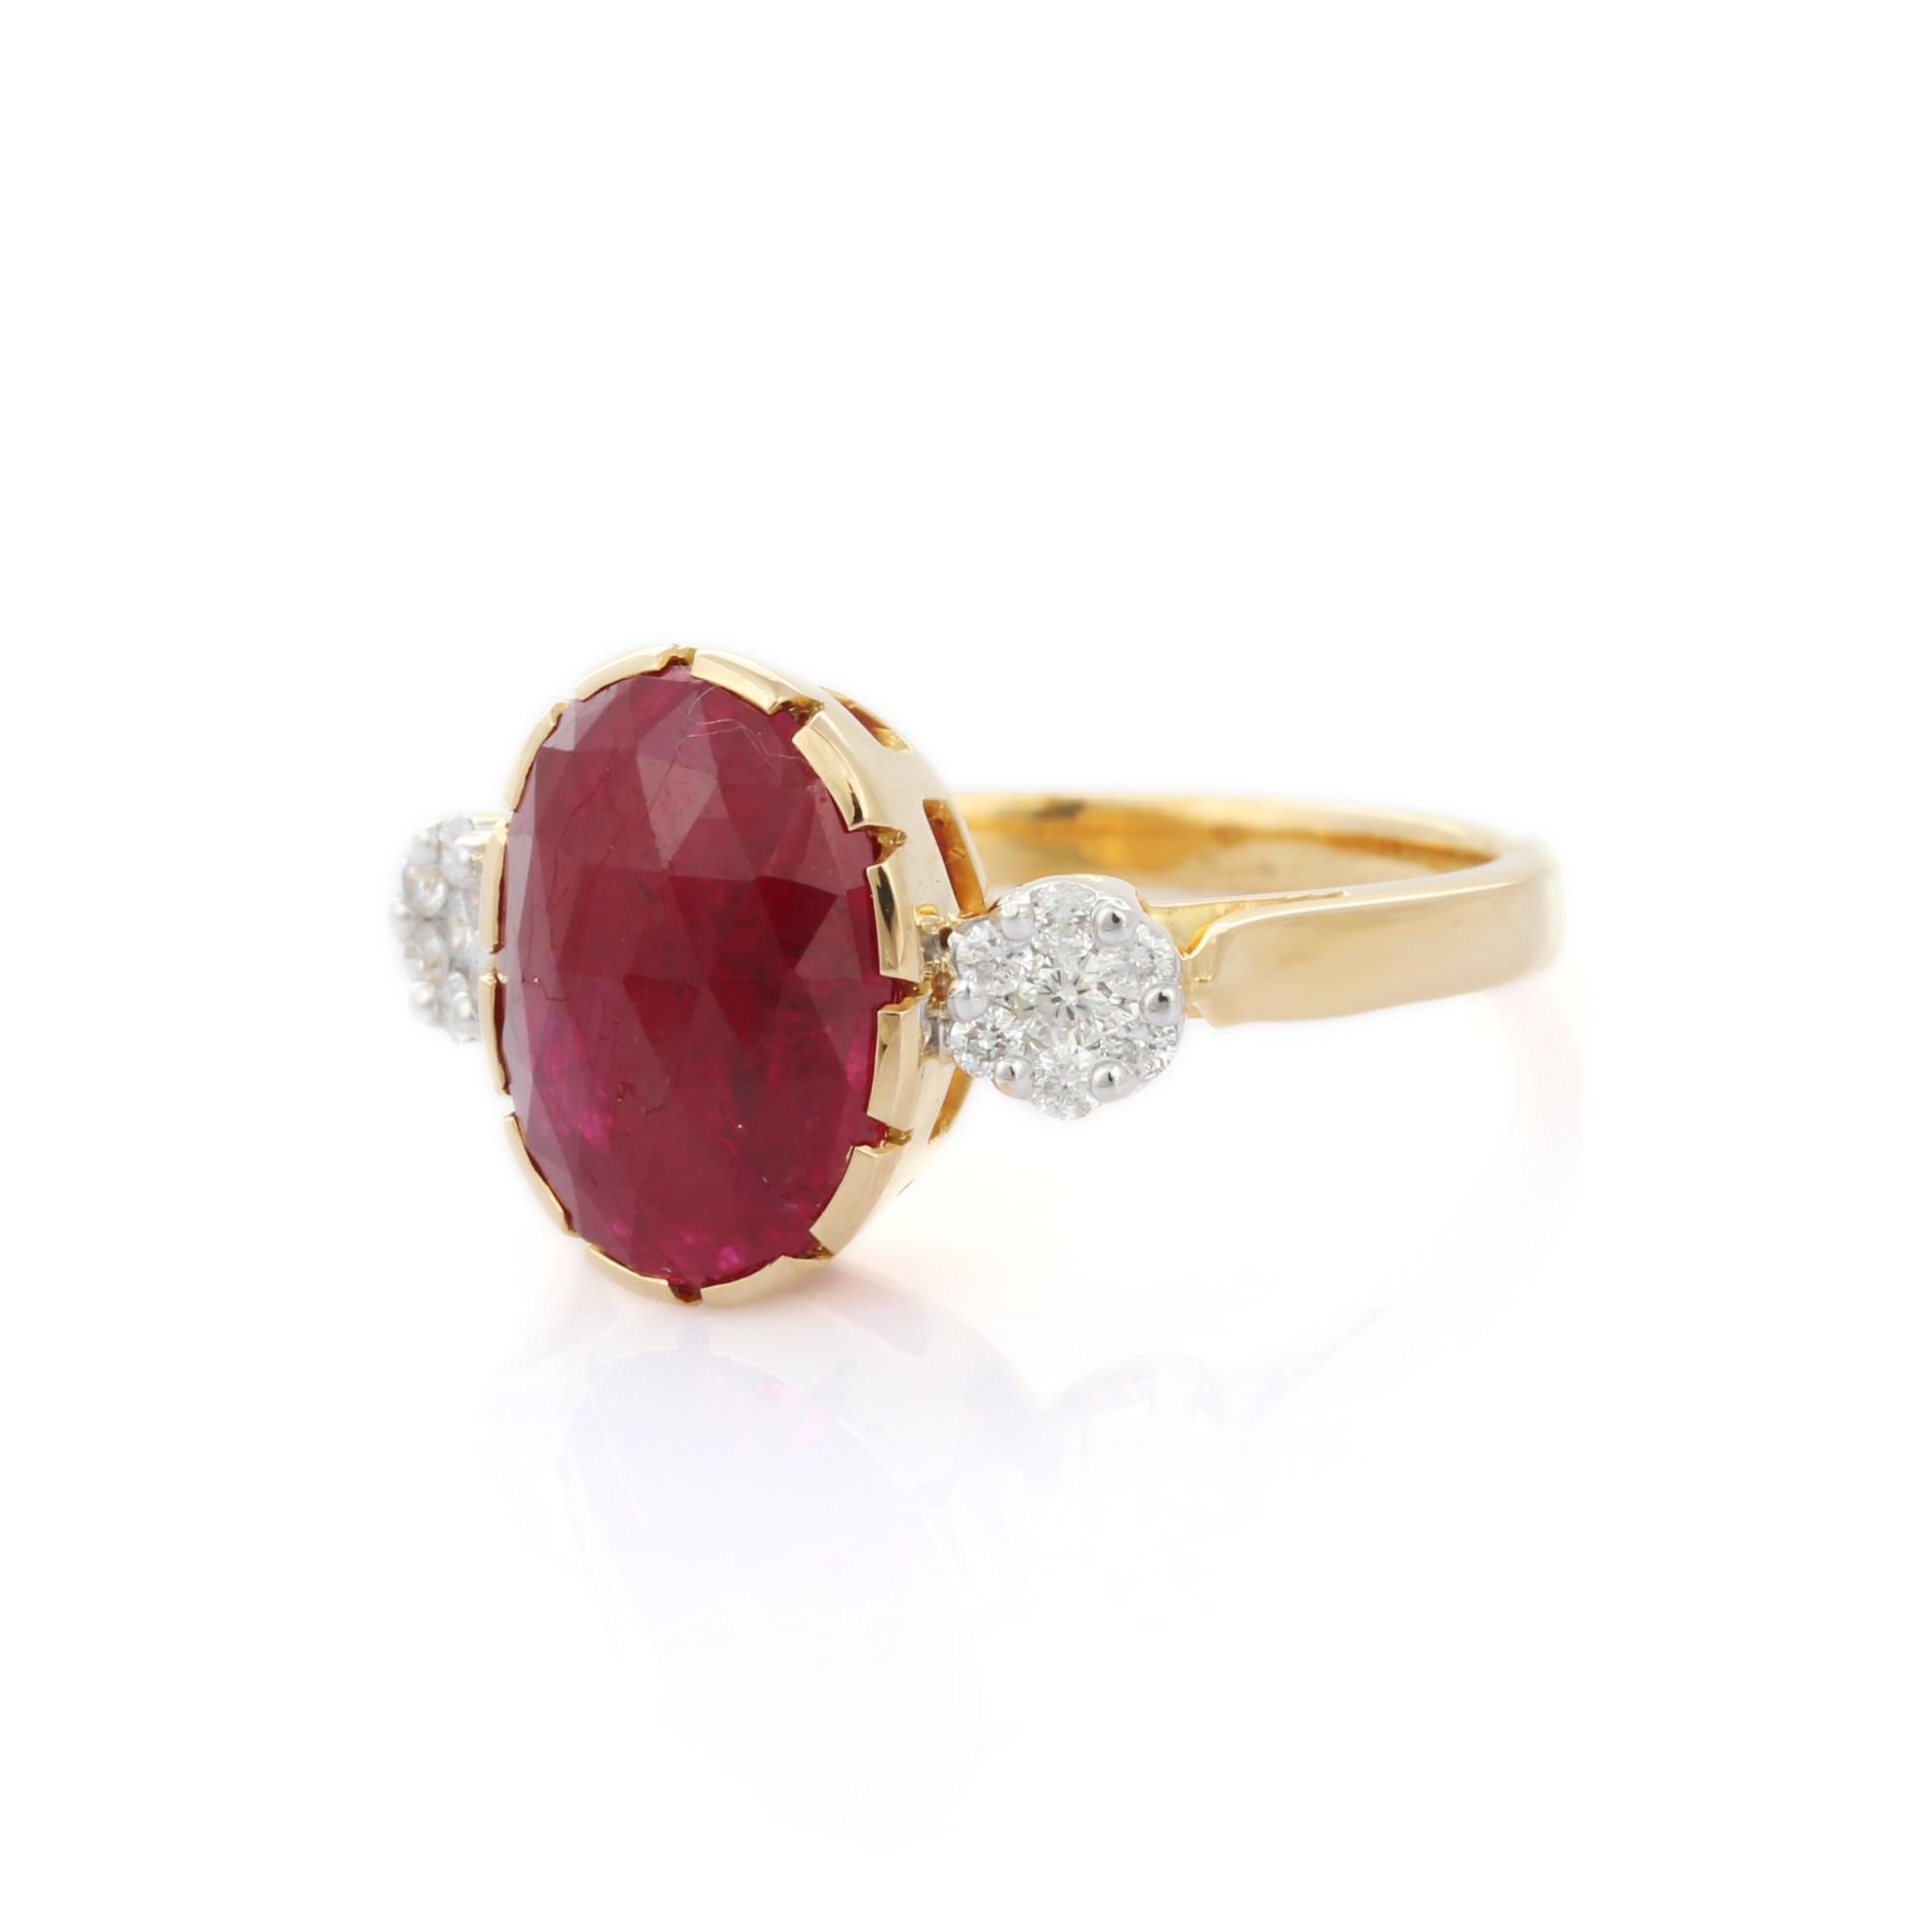 For Sale:  2.92 Carat Red Ruby and Diamond Engagement Ring in 18K Yellow Gold  3